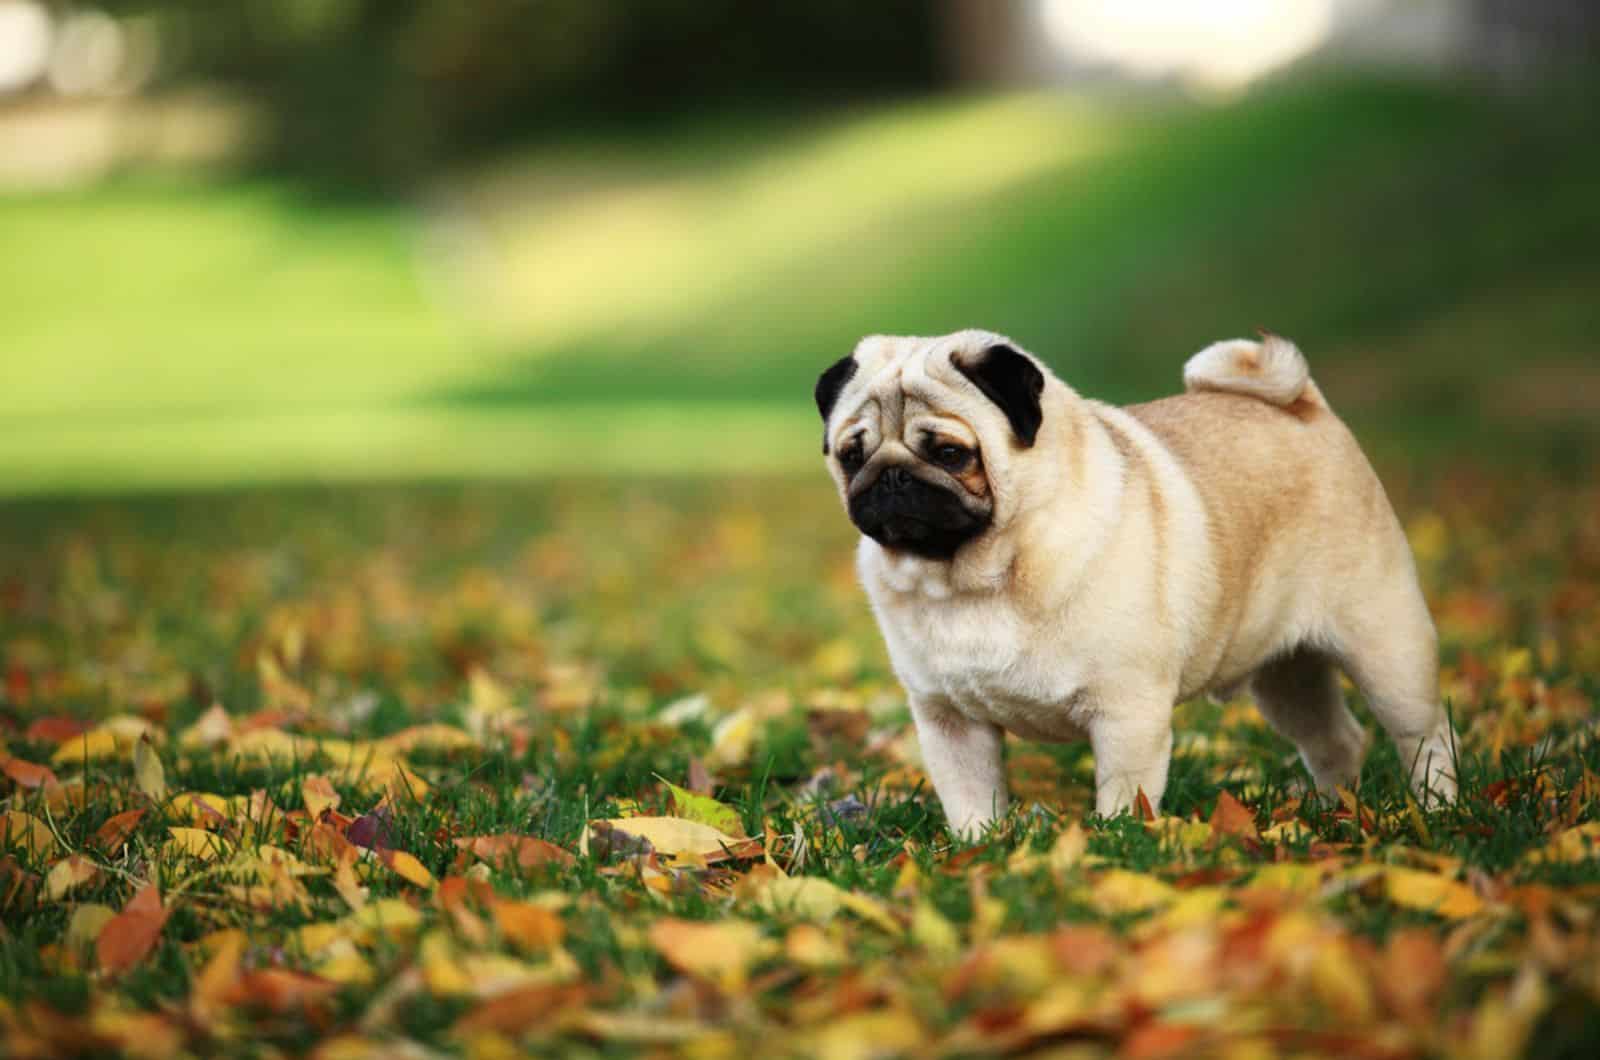 pug dog in the park in autumn